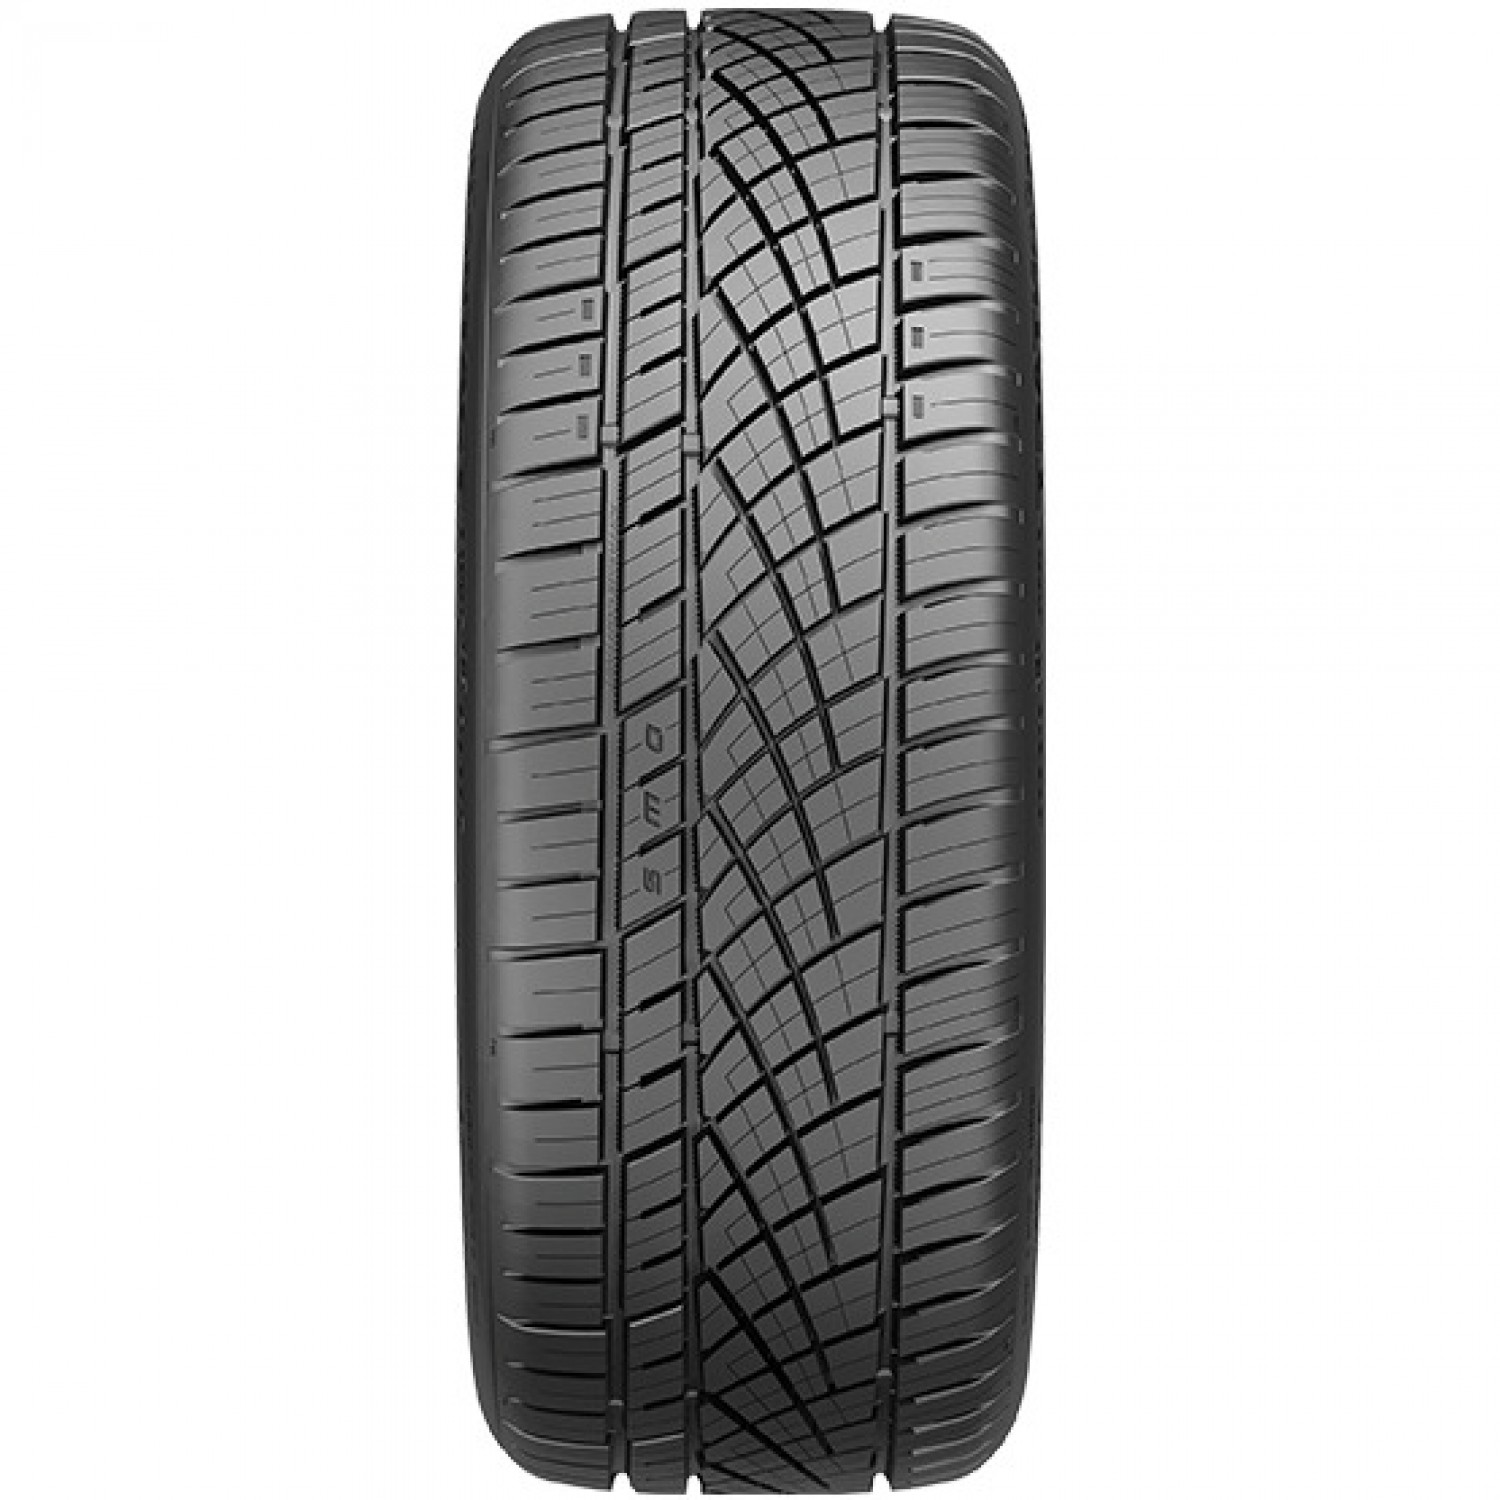 Continental ExtremeContact DWS06 Plus Black Sidewall Tire (285/30ZR19